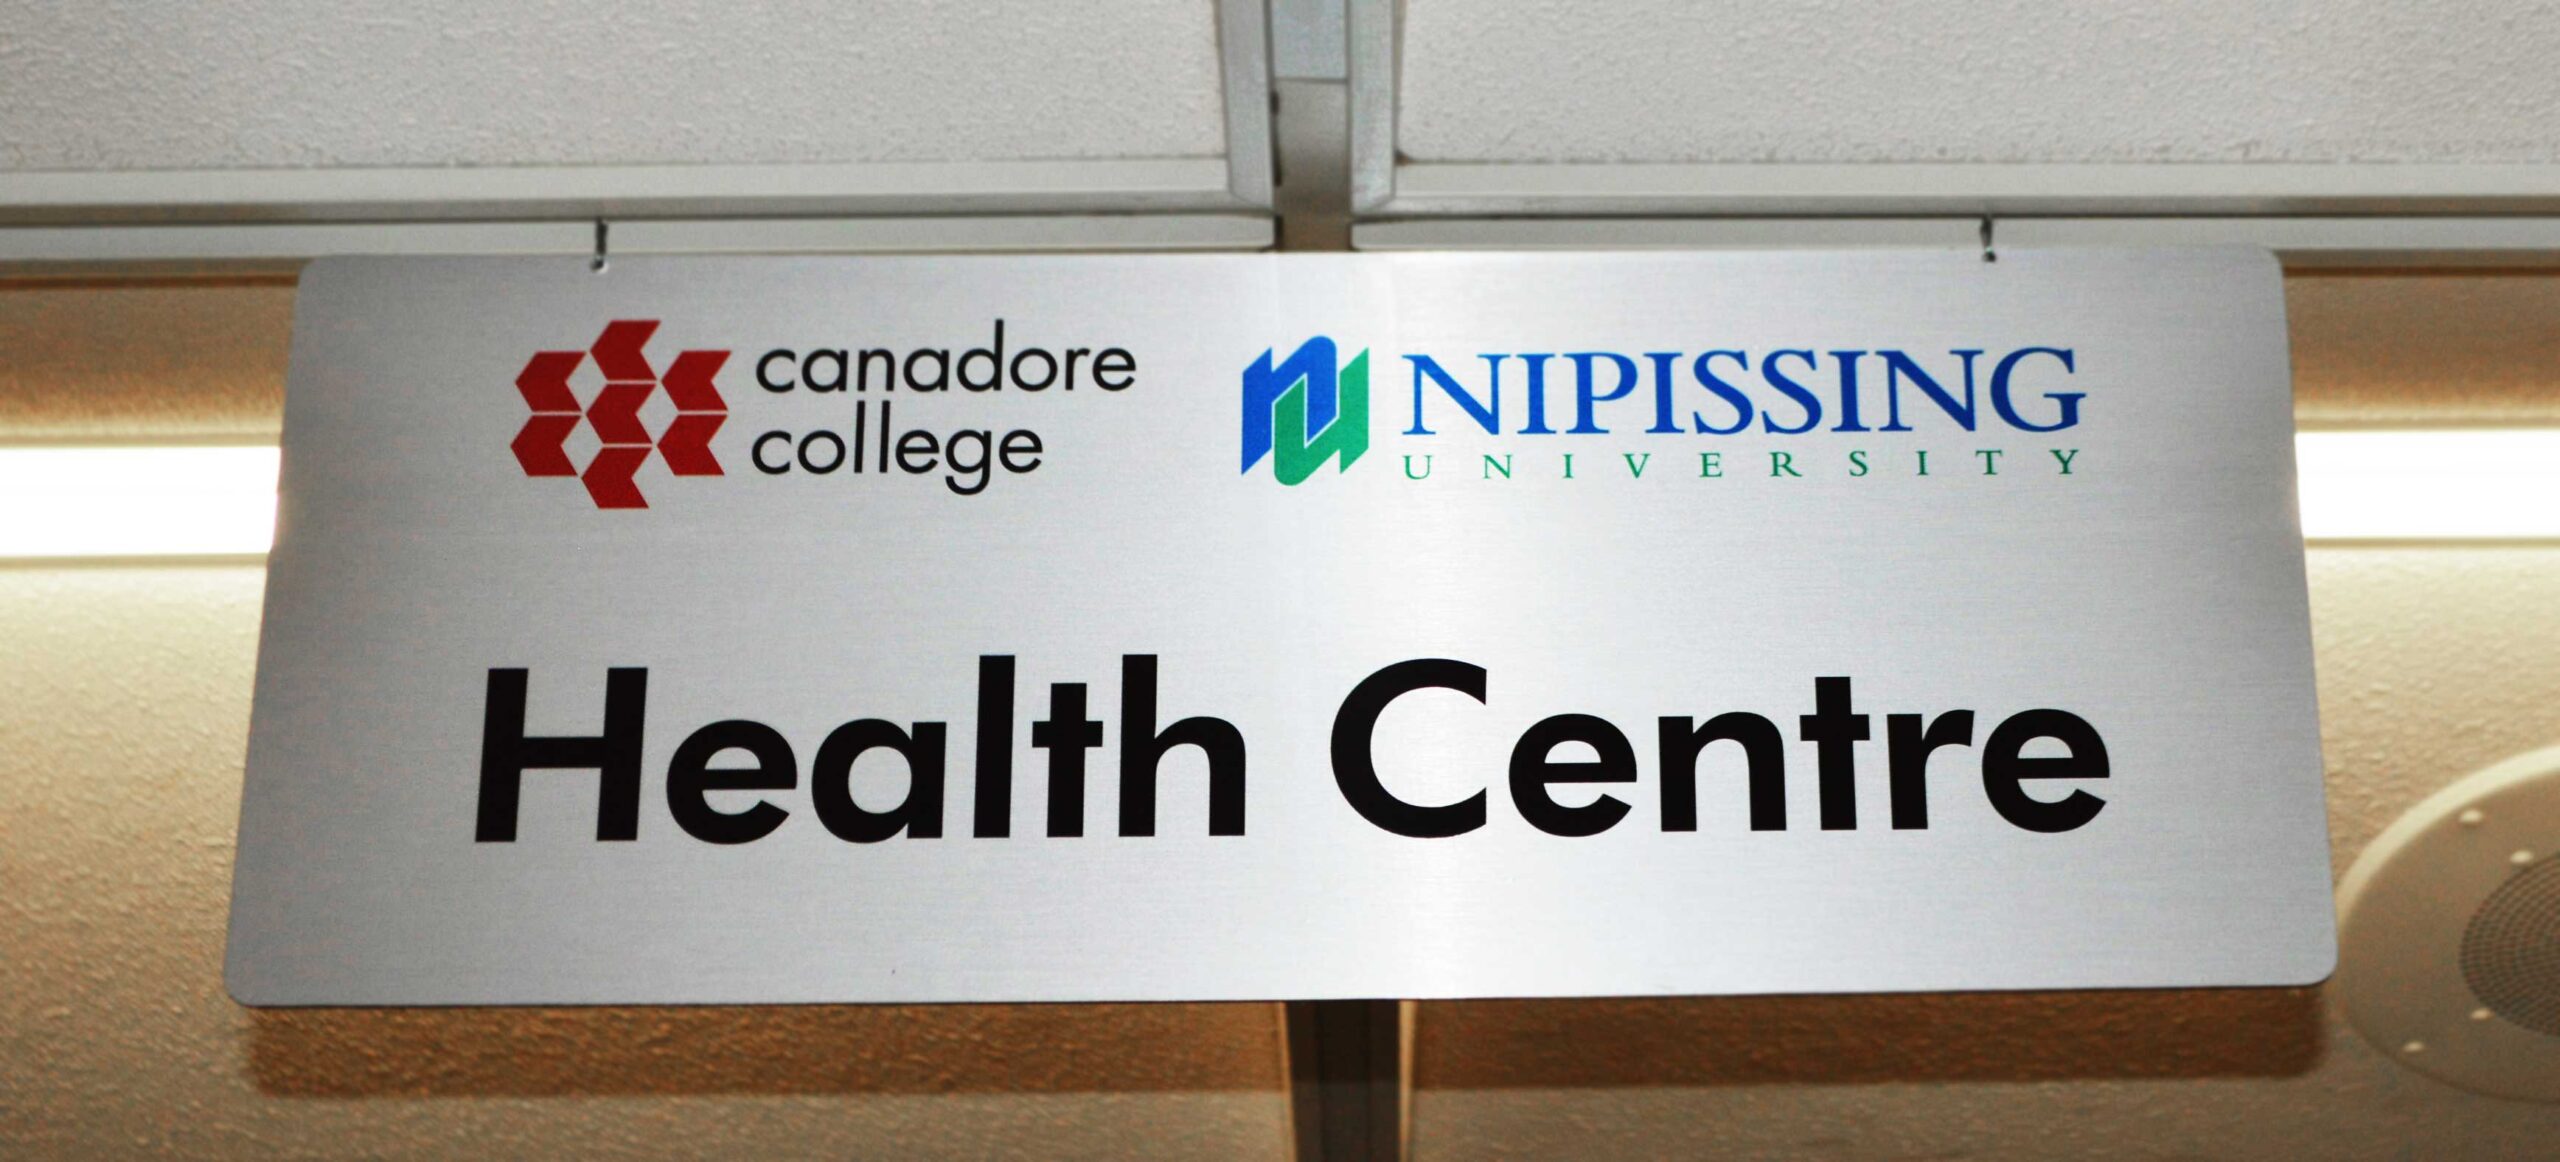 Canadore College & Nipissing University Health Centre - Hanging Sign